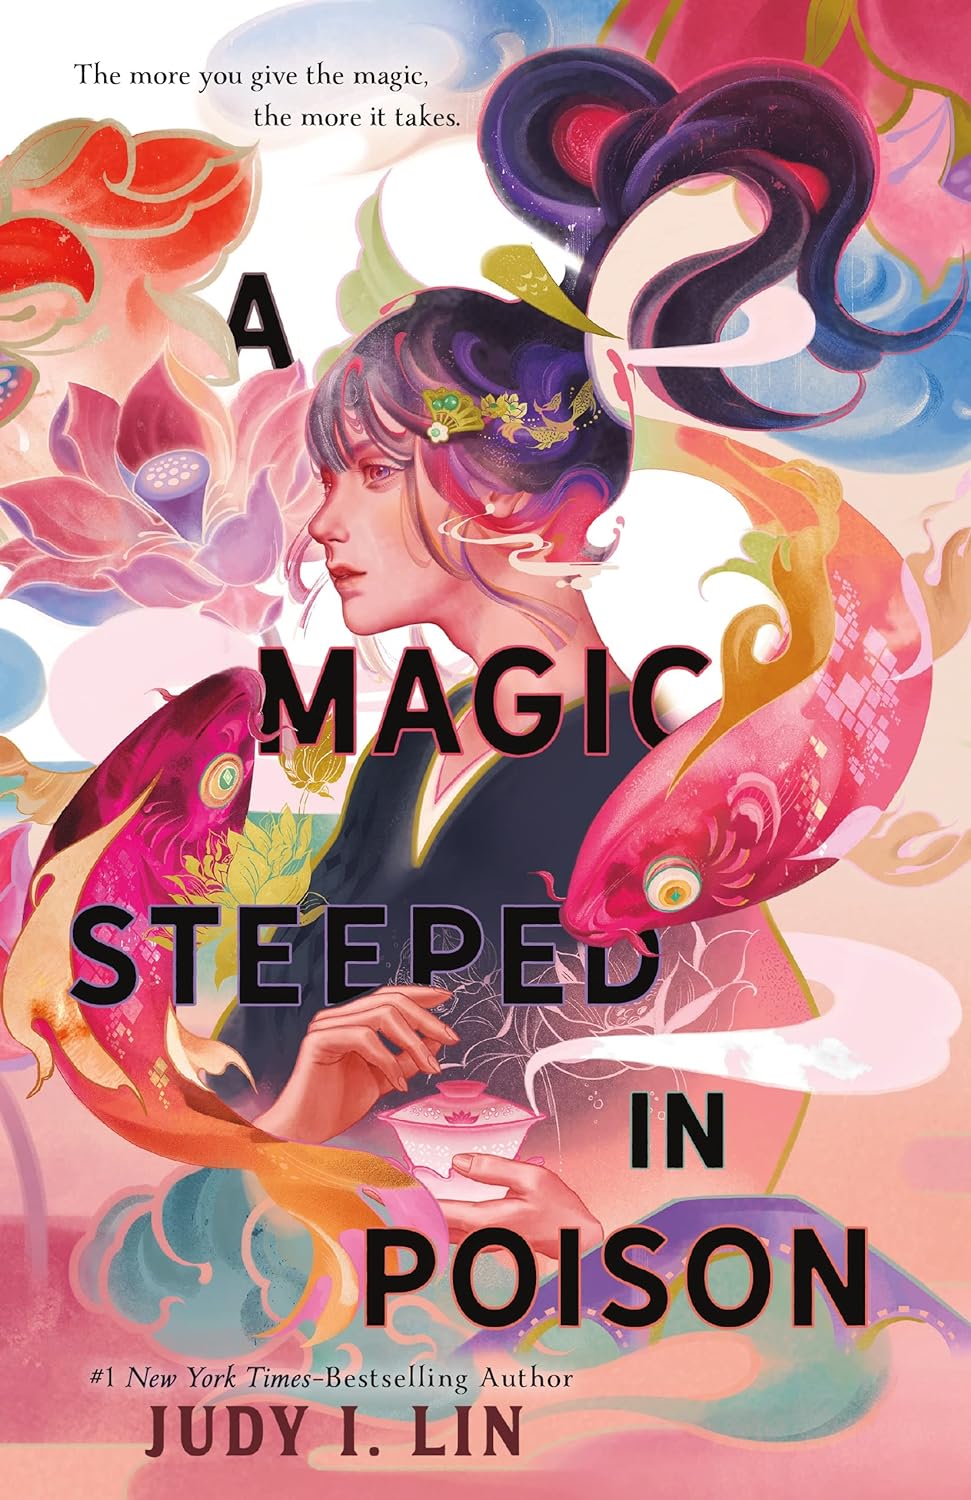 A Magic Steeped in Poison (The Book of Tea series) by Judy I. Lin